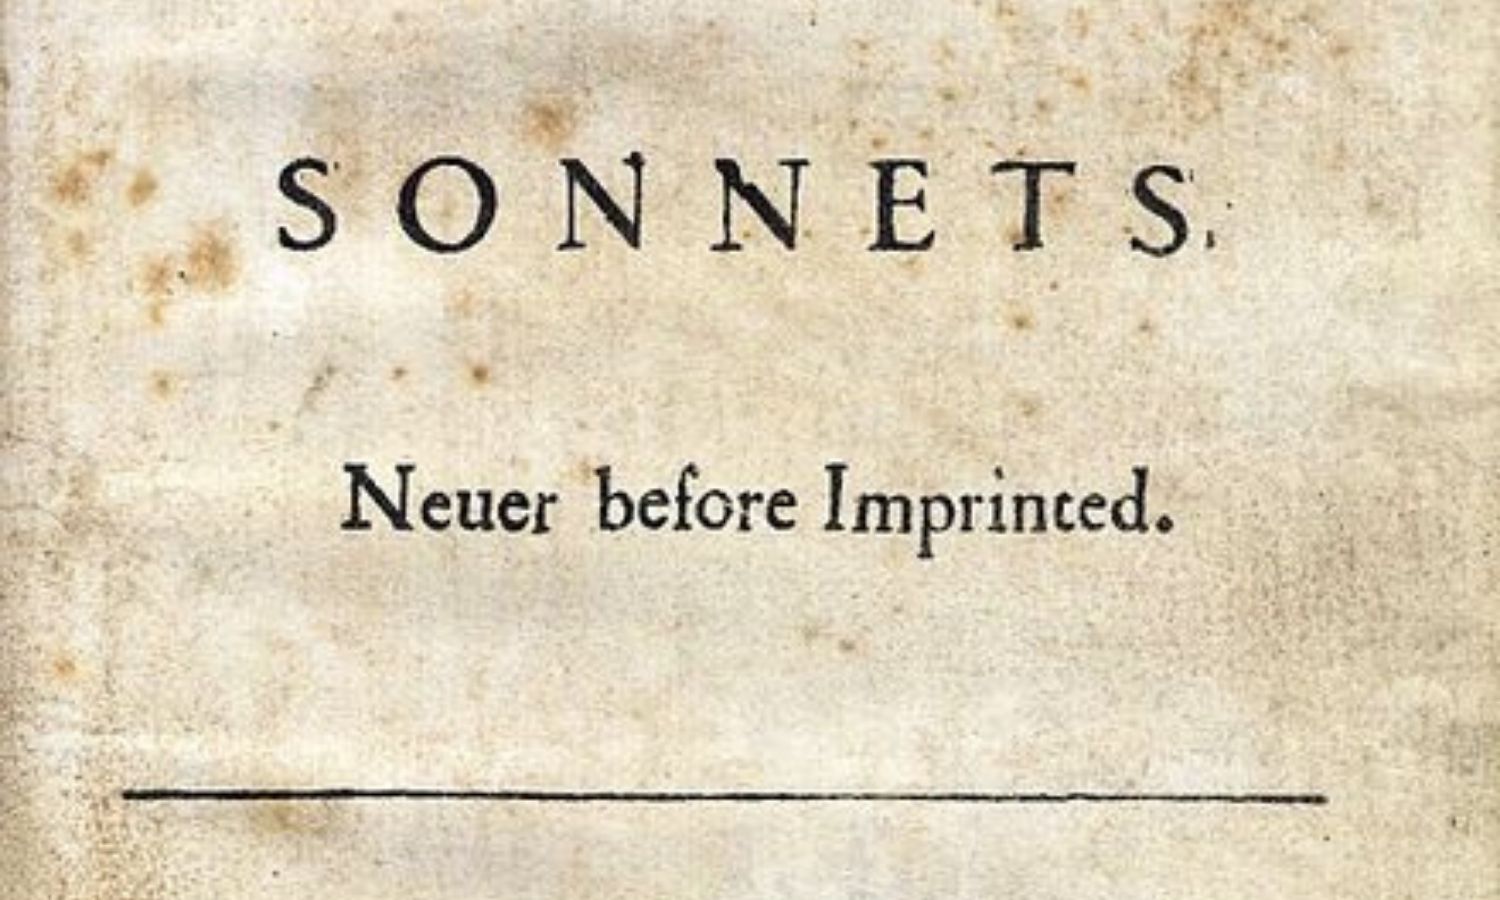 OTD in 1609: Shakespeare's Sonnets were first published in London.